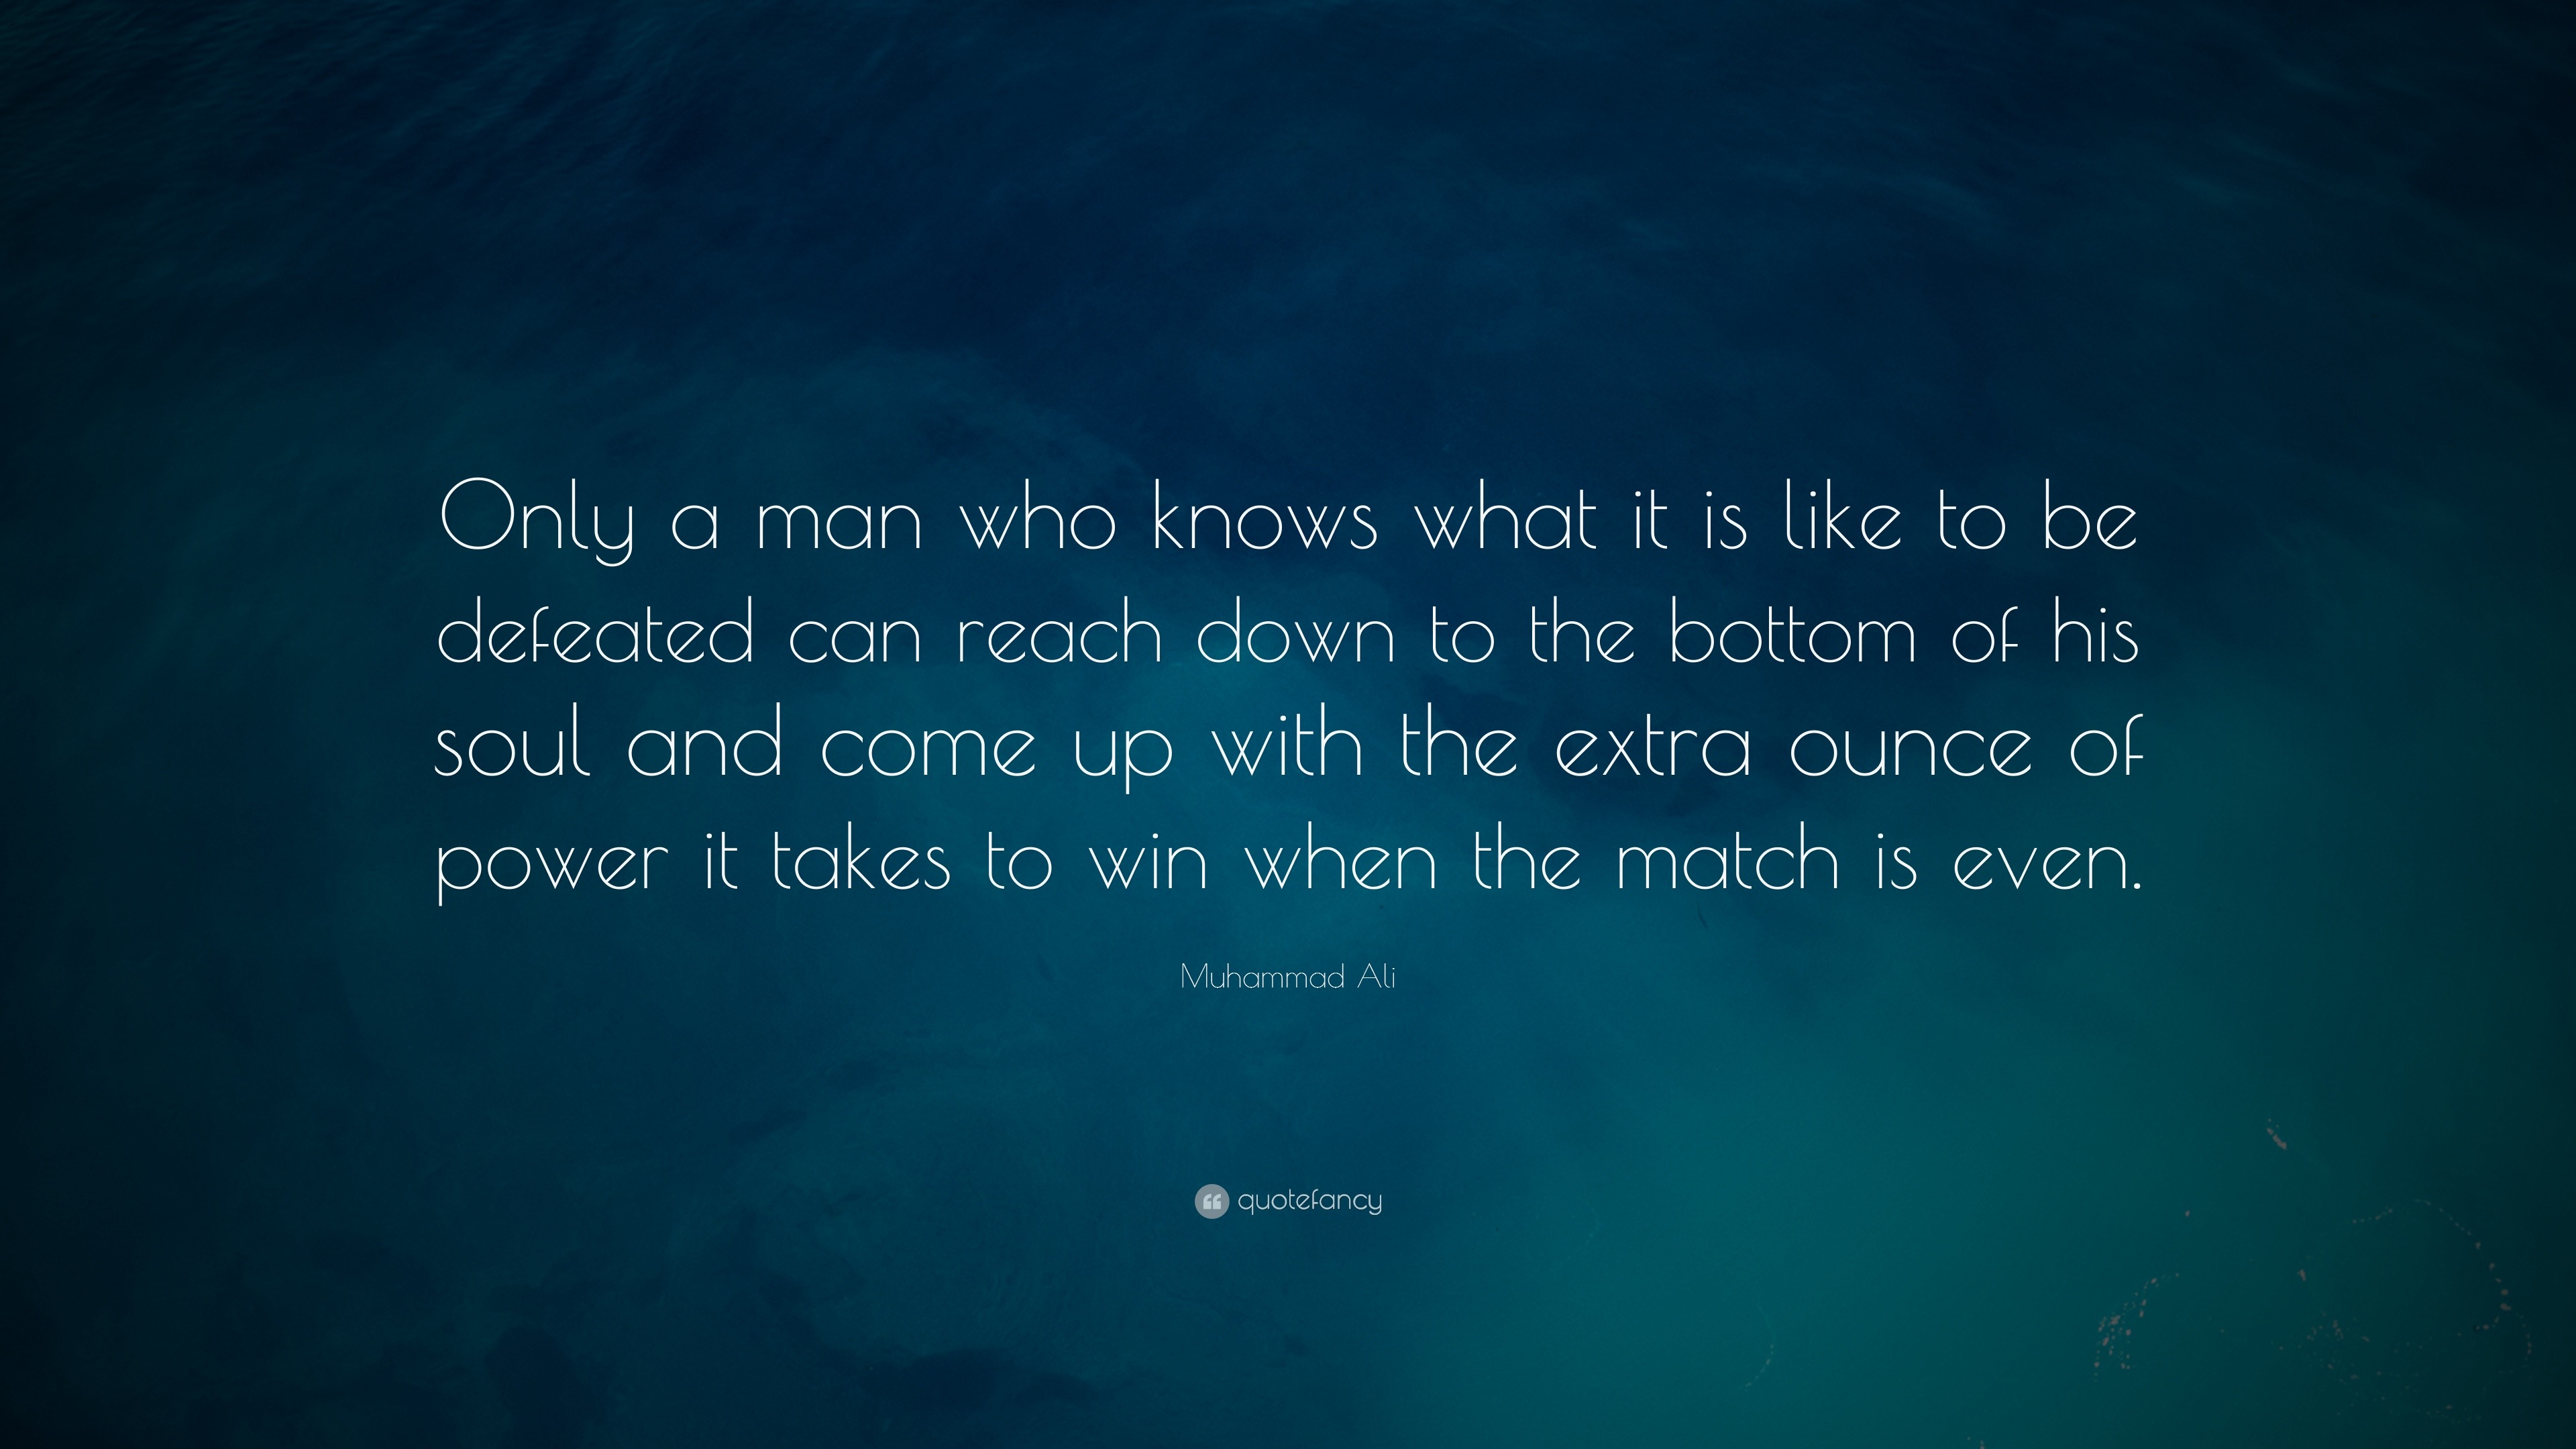 Muhammad Ali Quote: “Only a man who knows what it is like to be ...